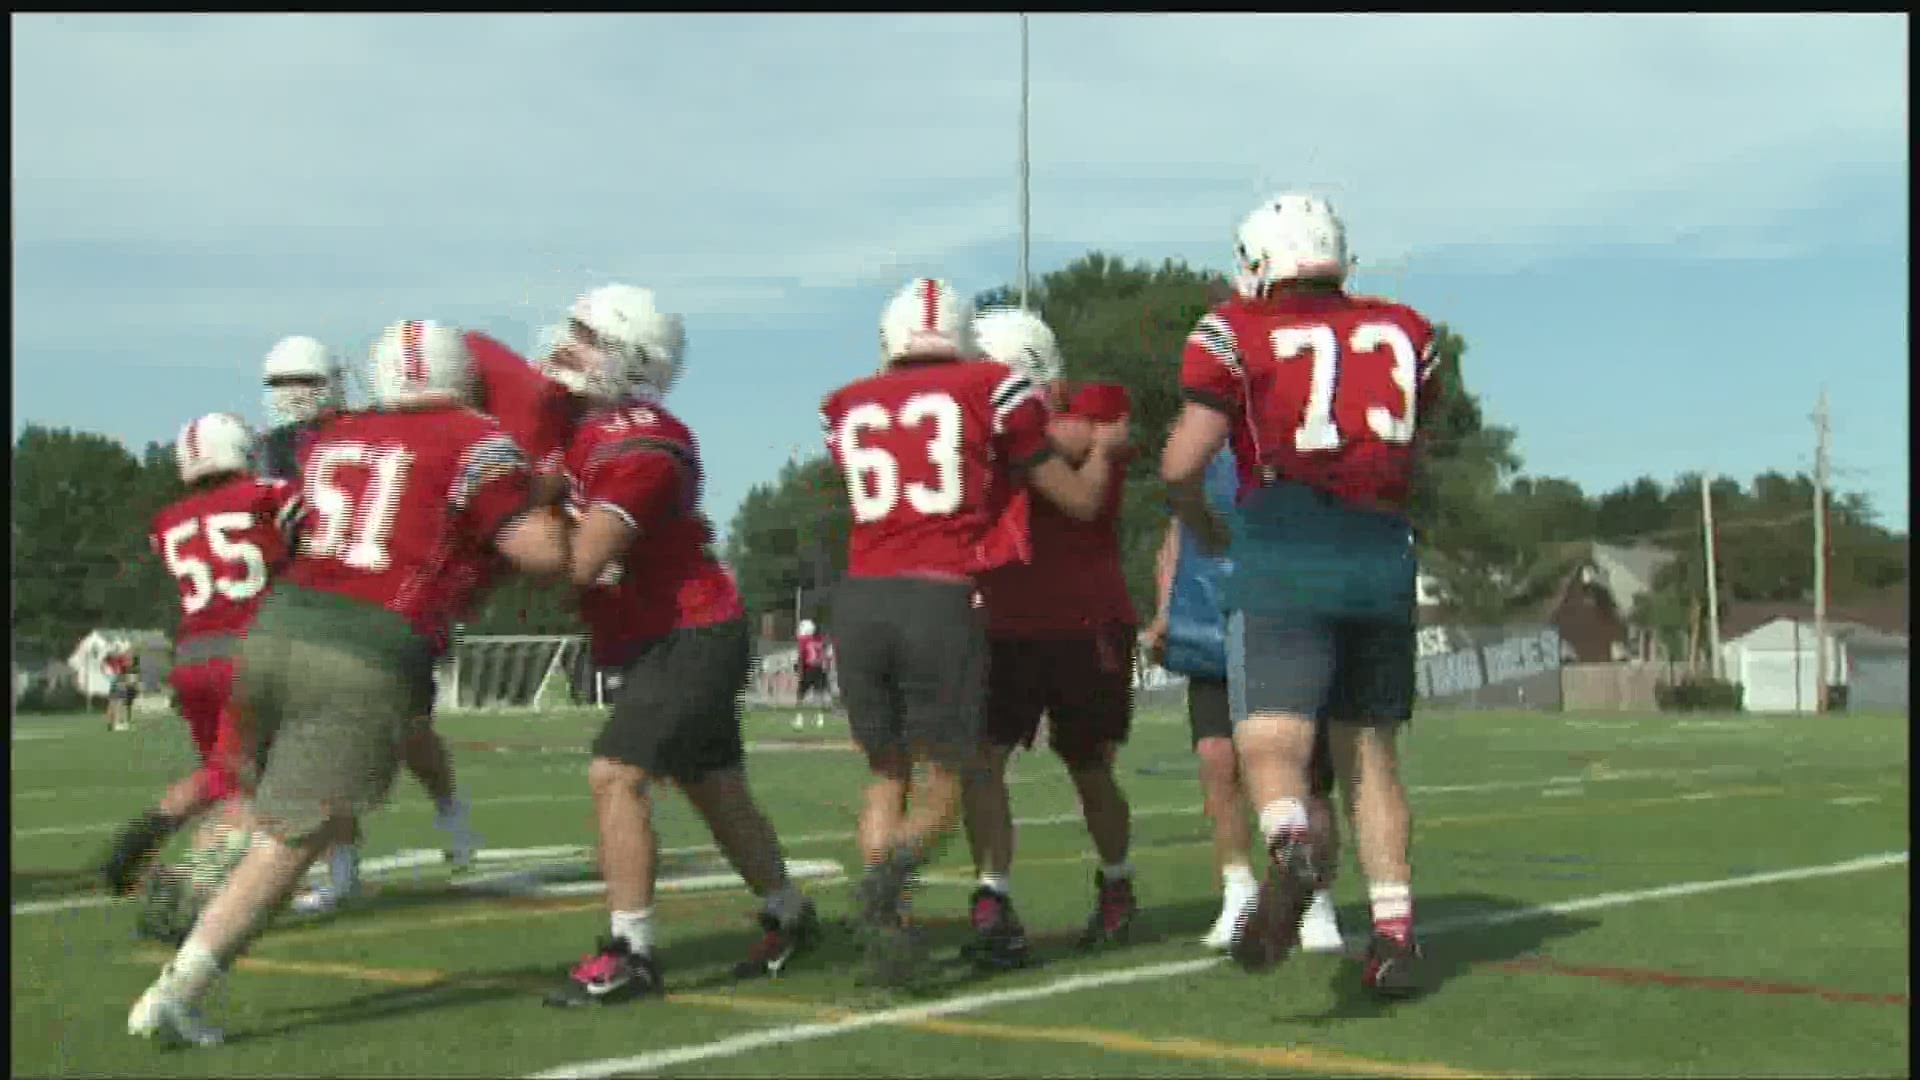 Assumption Football will be lead by a strong front line.  They are excited about their new schedule and the opportunities that are in front of them.